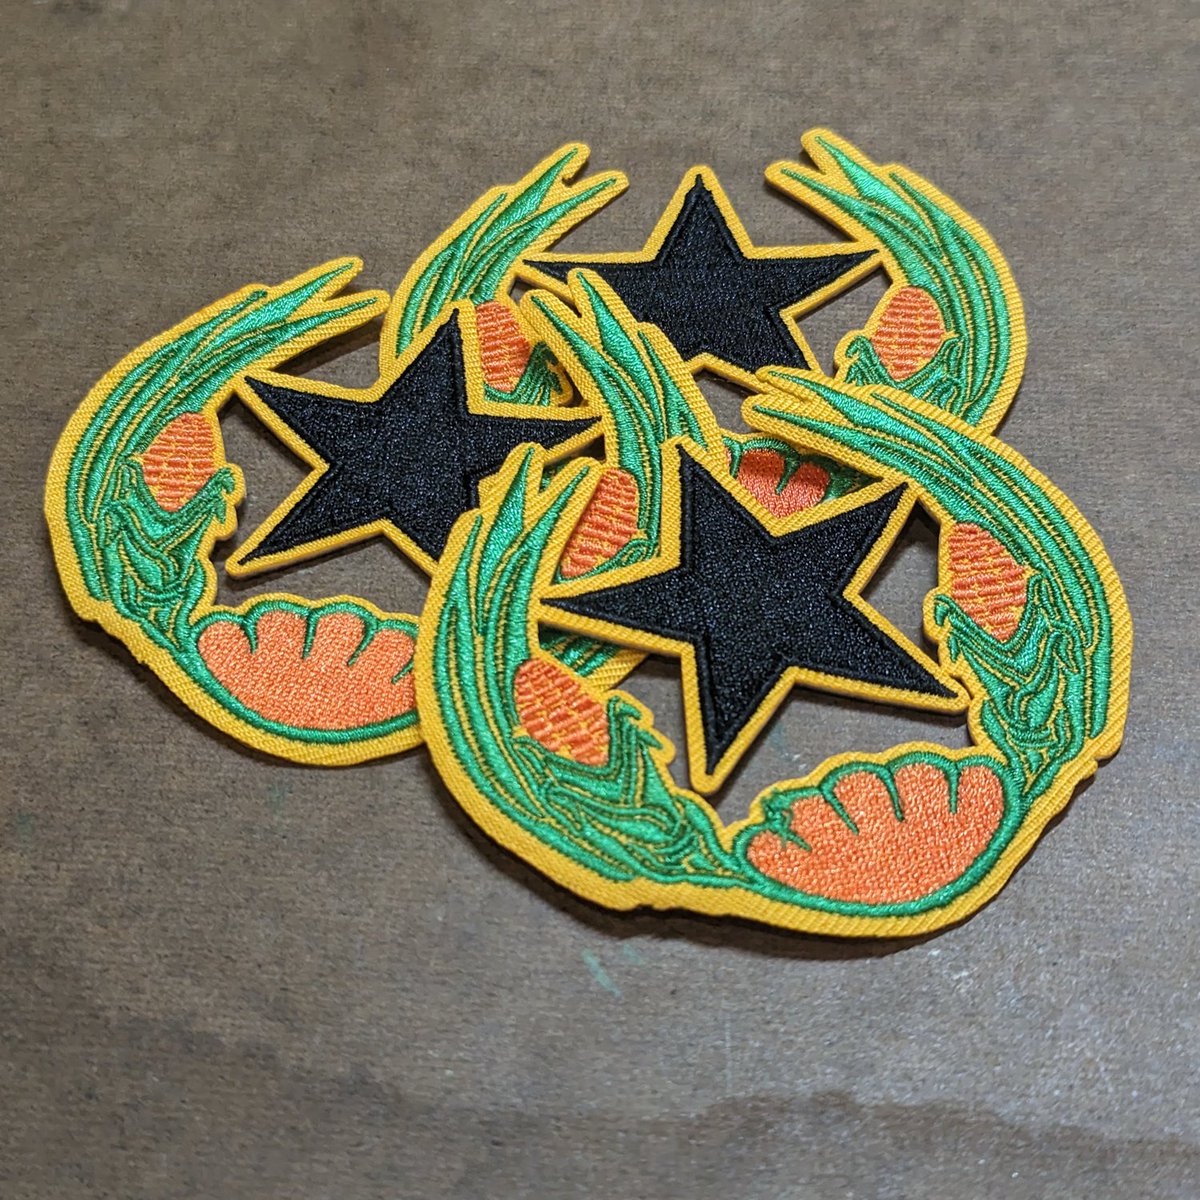 New Patch Alert: C.V. Black Star Patch...

#crazygoodz #streetwear #patches #blackstar #accessories #caboverde #guineabissau #capeverde #oldflag #amilcarcabral